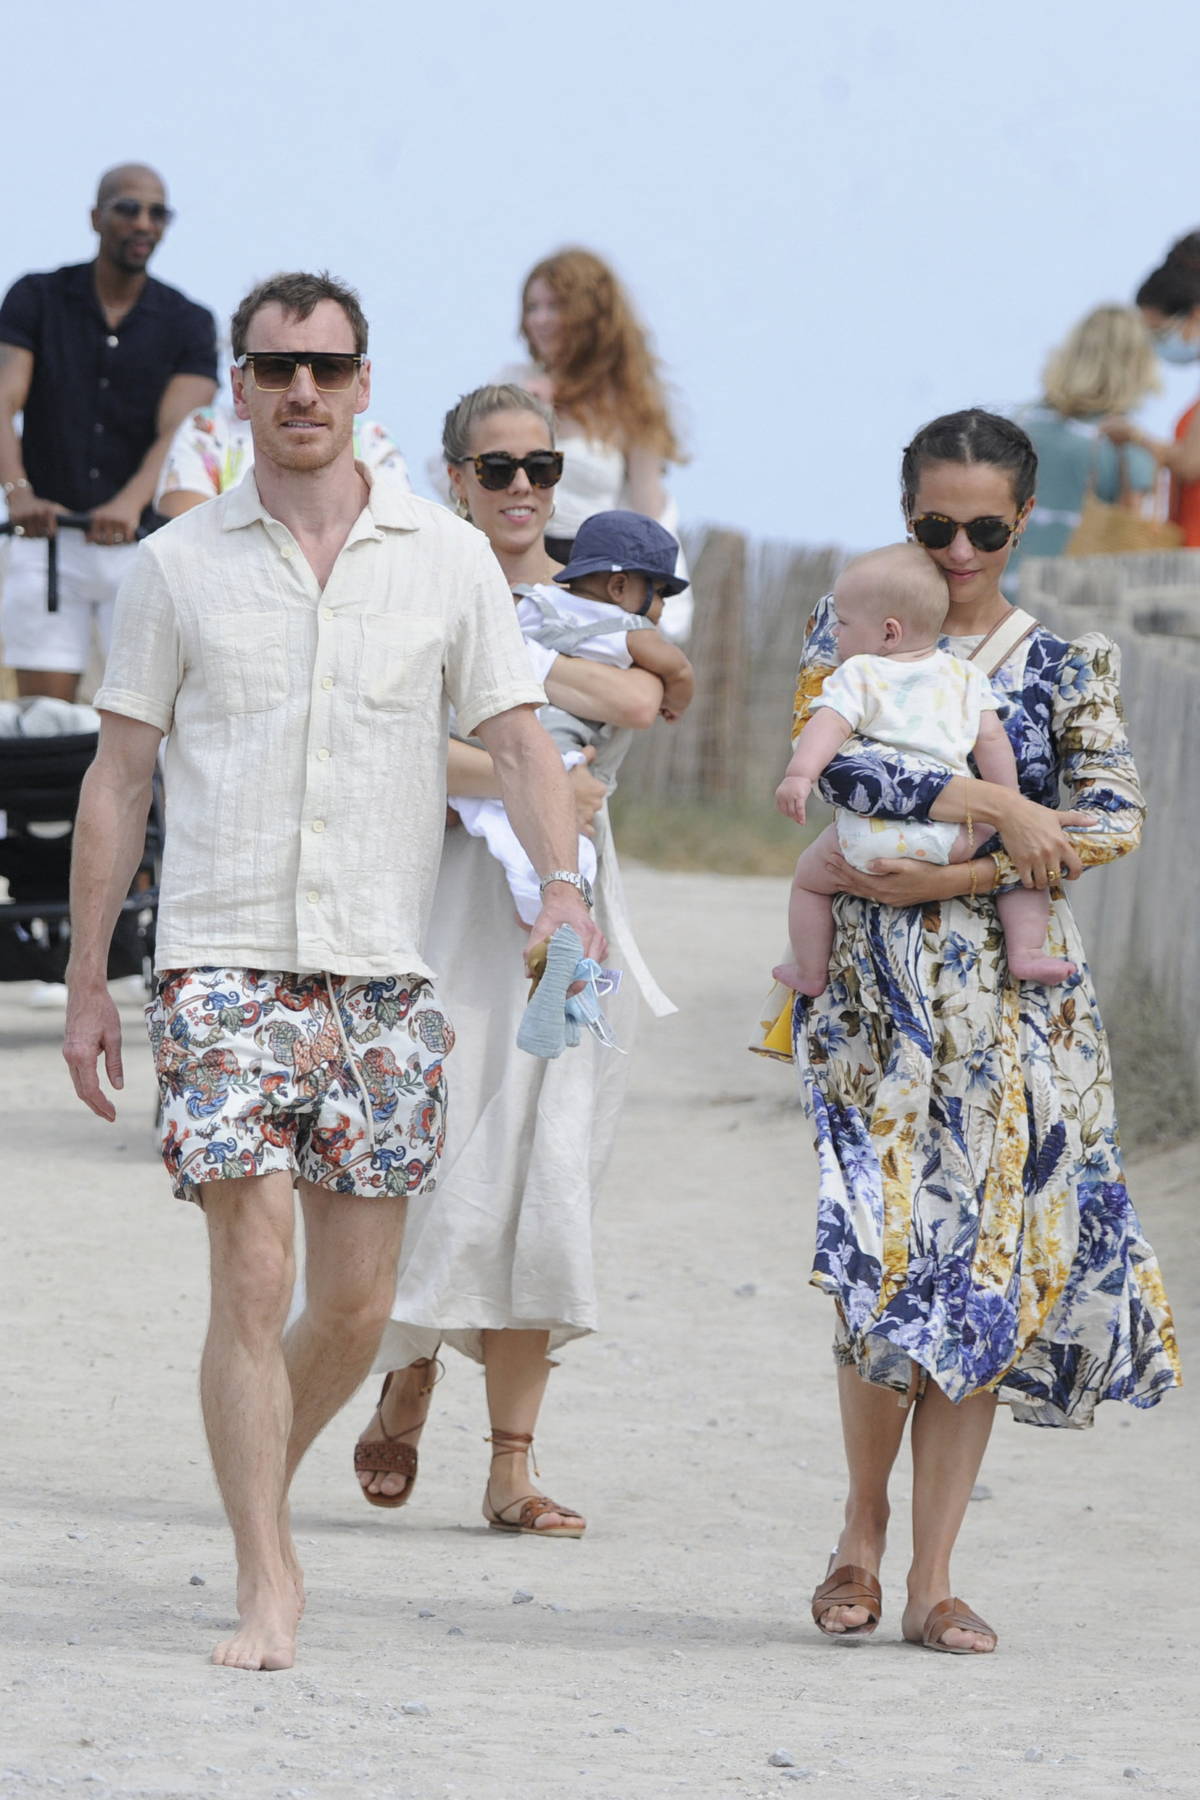 Michael Fassbender and Alicia Vikander Took a Vow in Ibiza